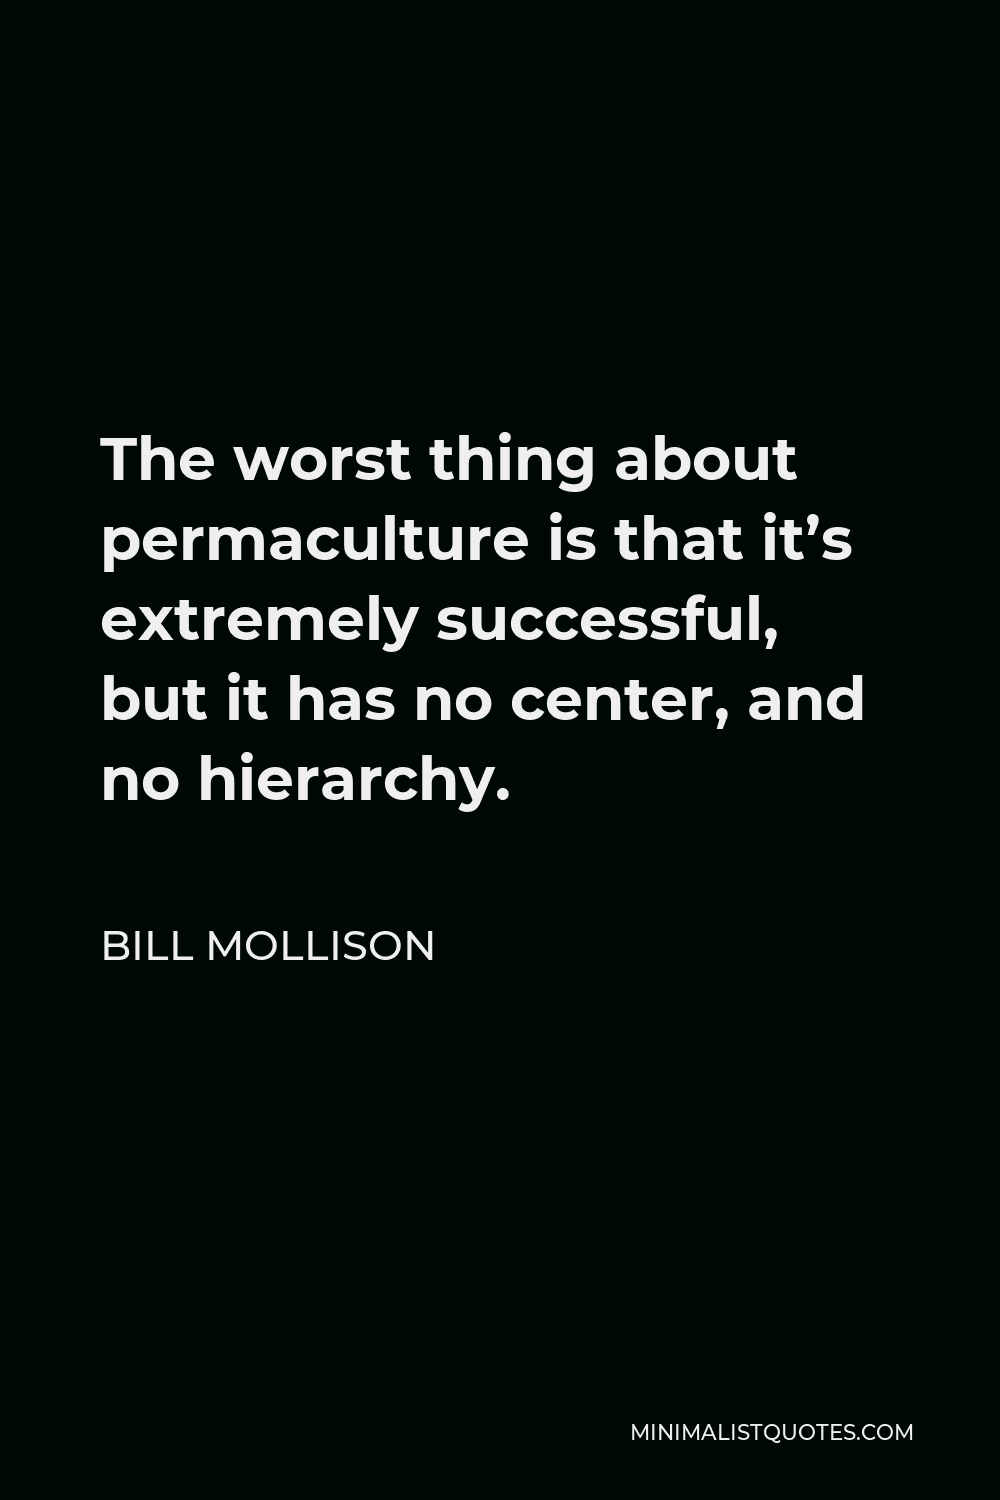 Bill Mollison Quote - The worst thing about permaculture is that it’s extremely successful, but it has no center, and no hierarchy.